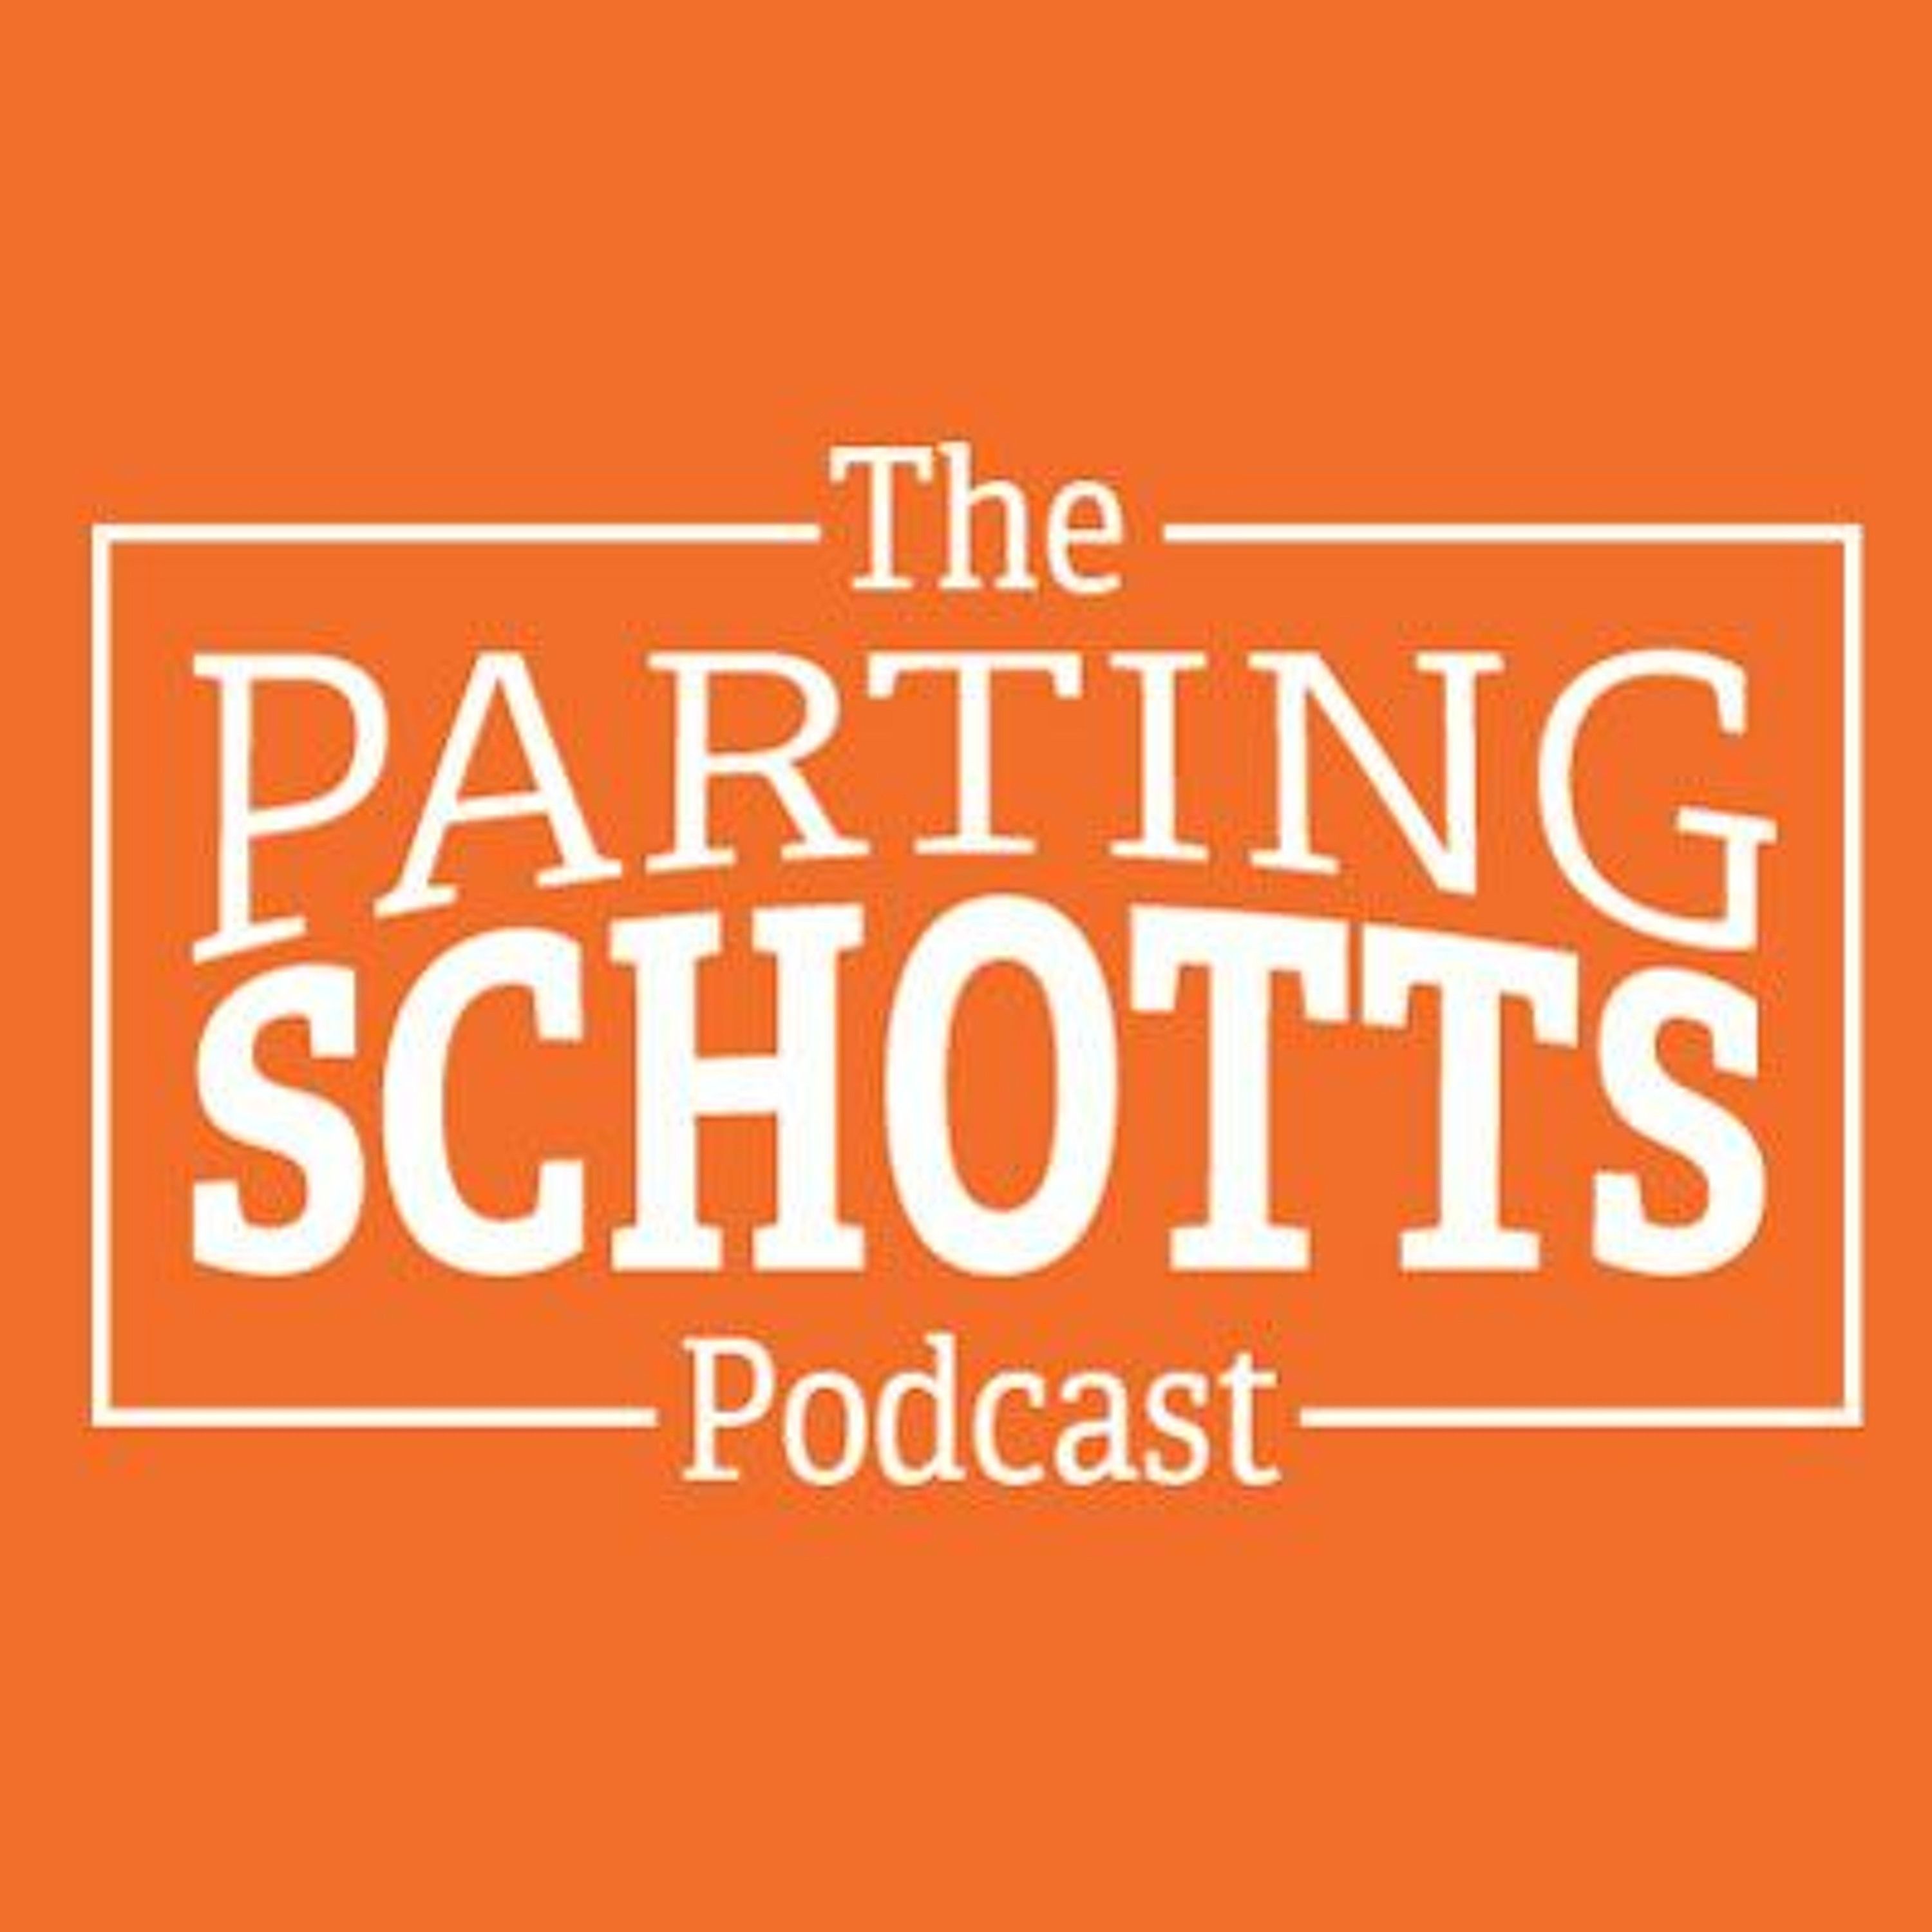 The Parting Schotts Podcast: Talking Travers Stakes, Premier Lacrosse League